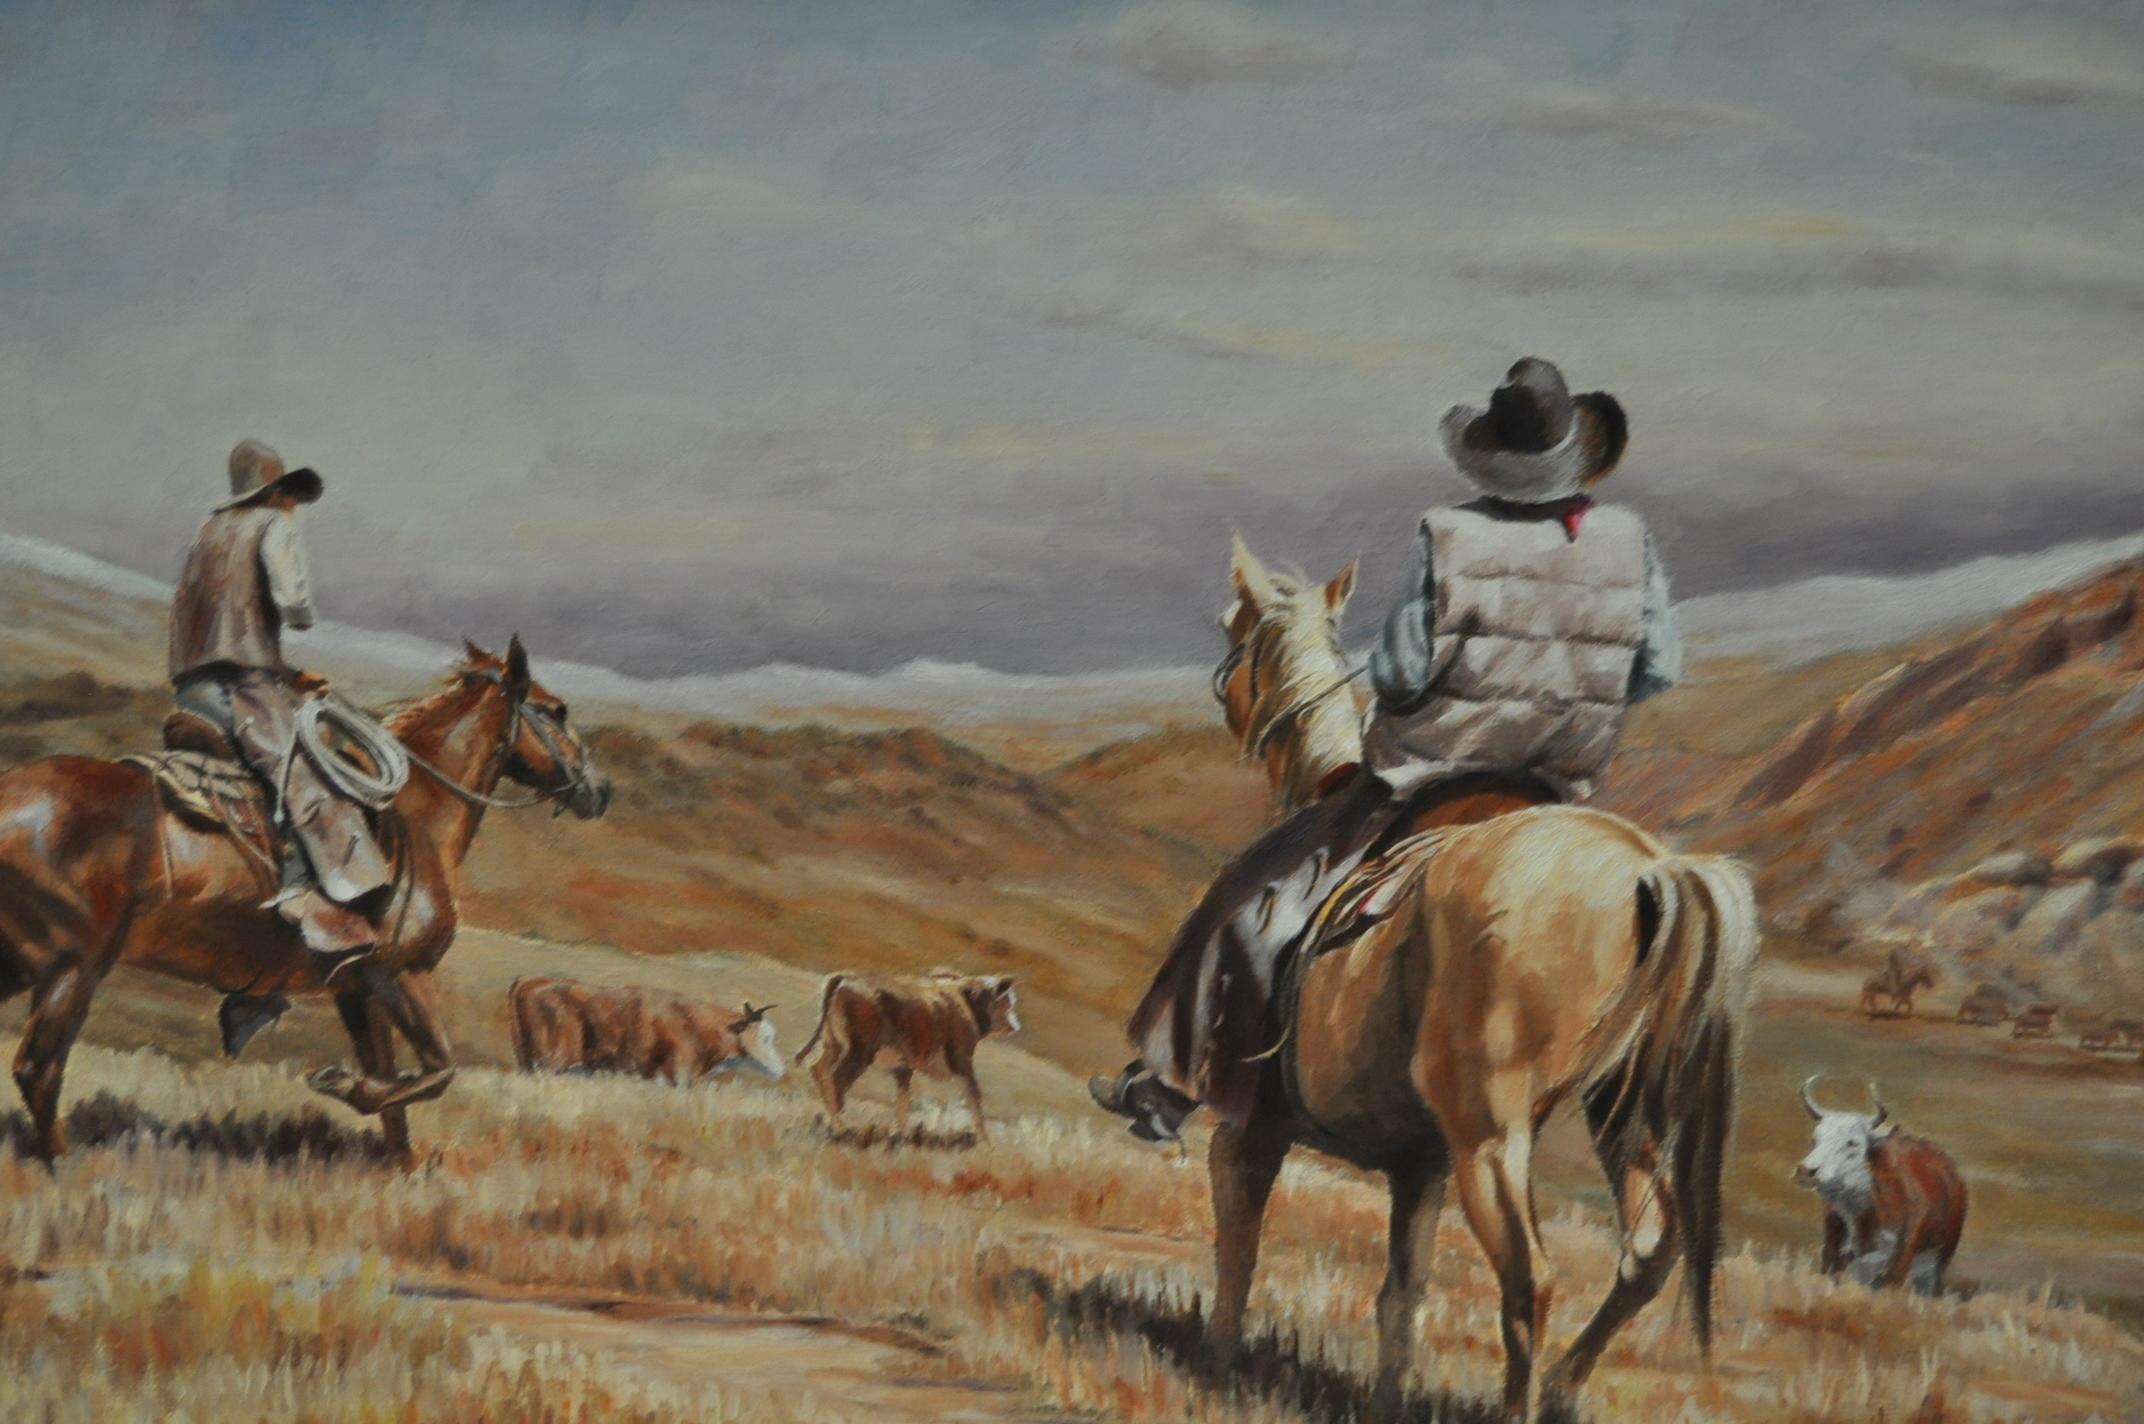 Burt dinius oil painting, fall round up, circa 1982

Fine art western painting by listed artist Burt Dinius, circa 1982, signed lower left.

This oil on board painting shows cowboys during the 